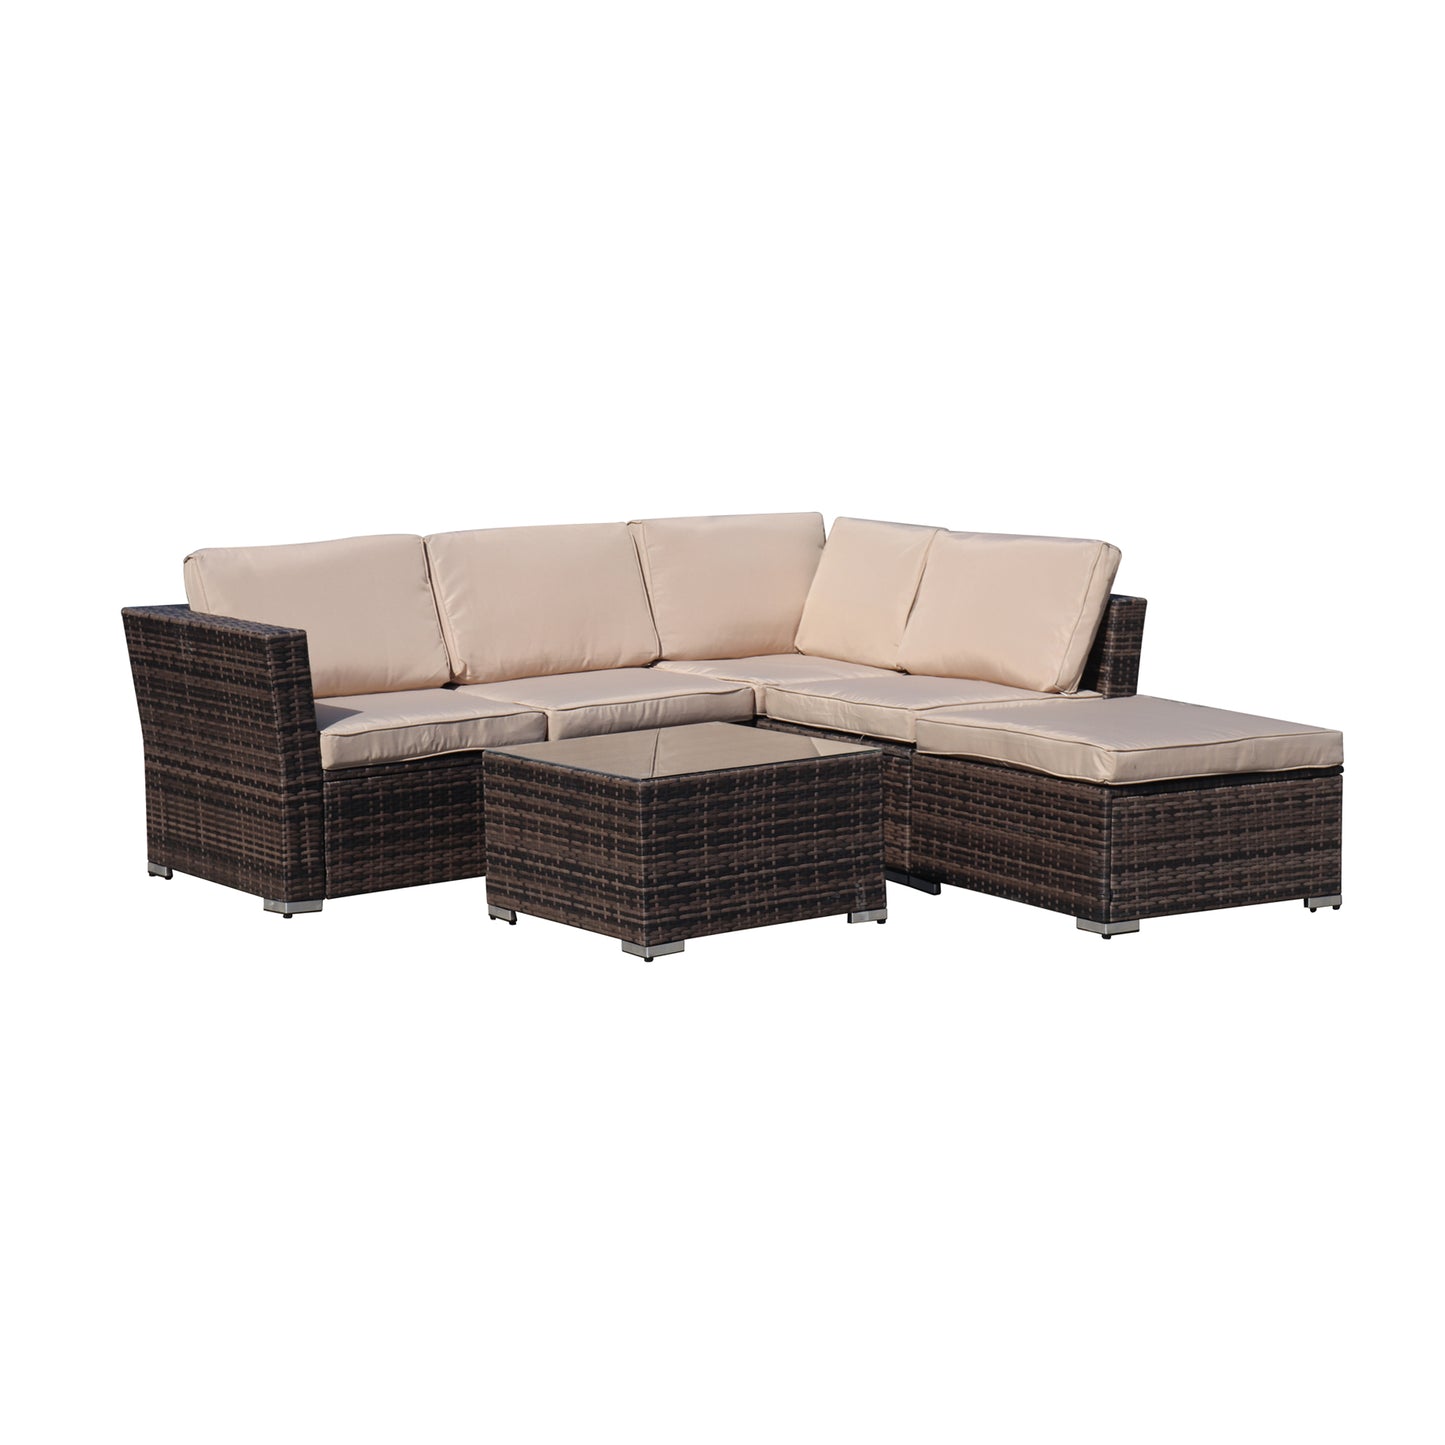 4-Piece Patio Wicker Furniture Set Outdoor Rattan Sectional Sofa, All-Weather Brown Wicker Rattan Chair with Tempered Glass Table